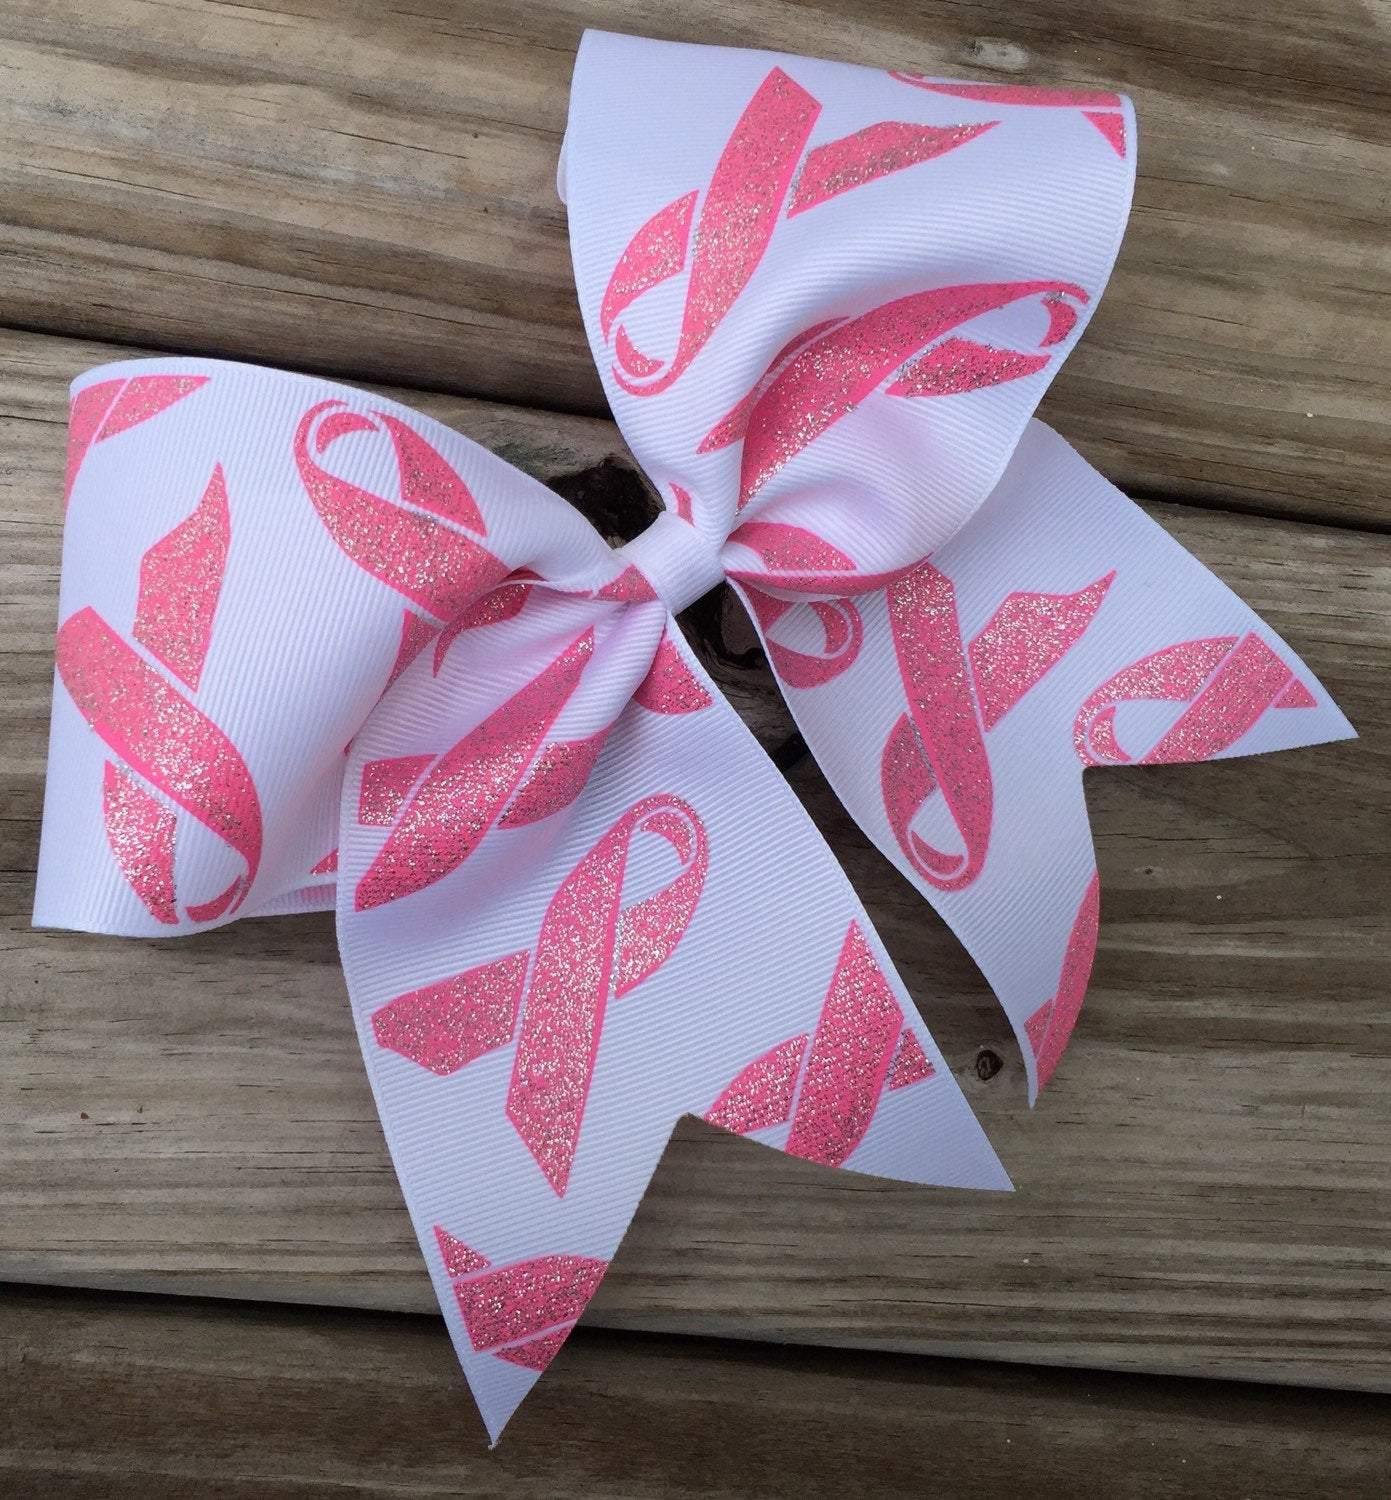 White Ribbon with Pink Glitter Breast Cancer Awareness Symbol